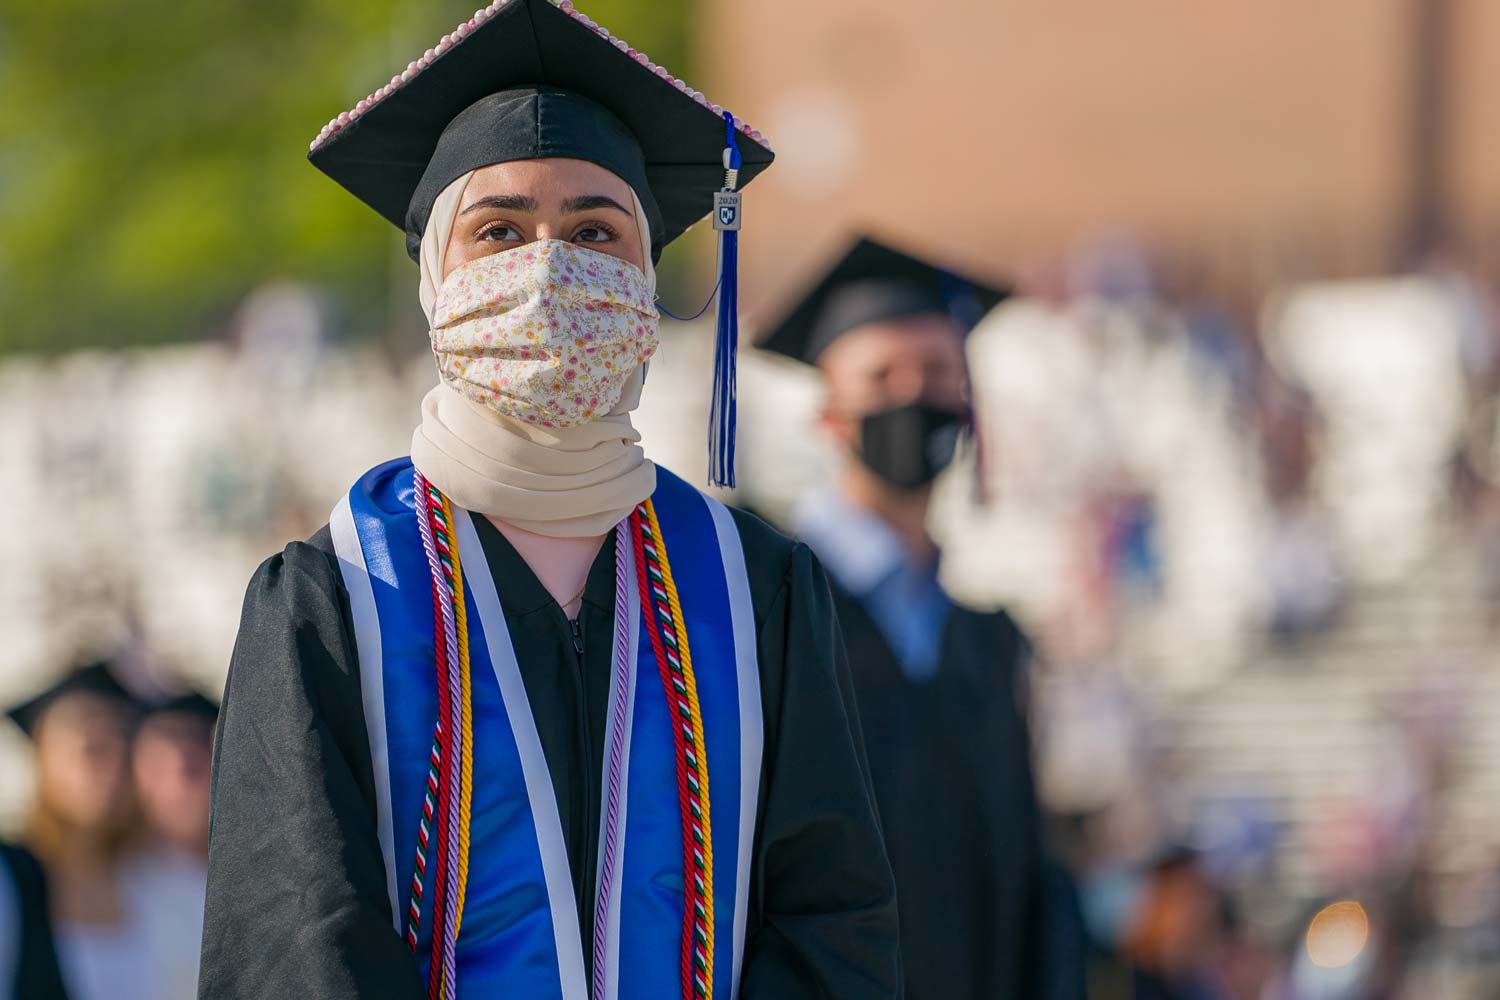 A student wearing a cap, gown, and floral head covering watches the ceremony with their hands held in respect